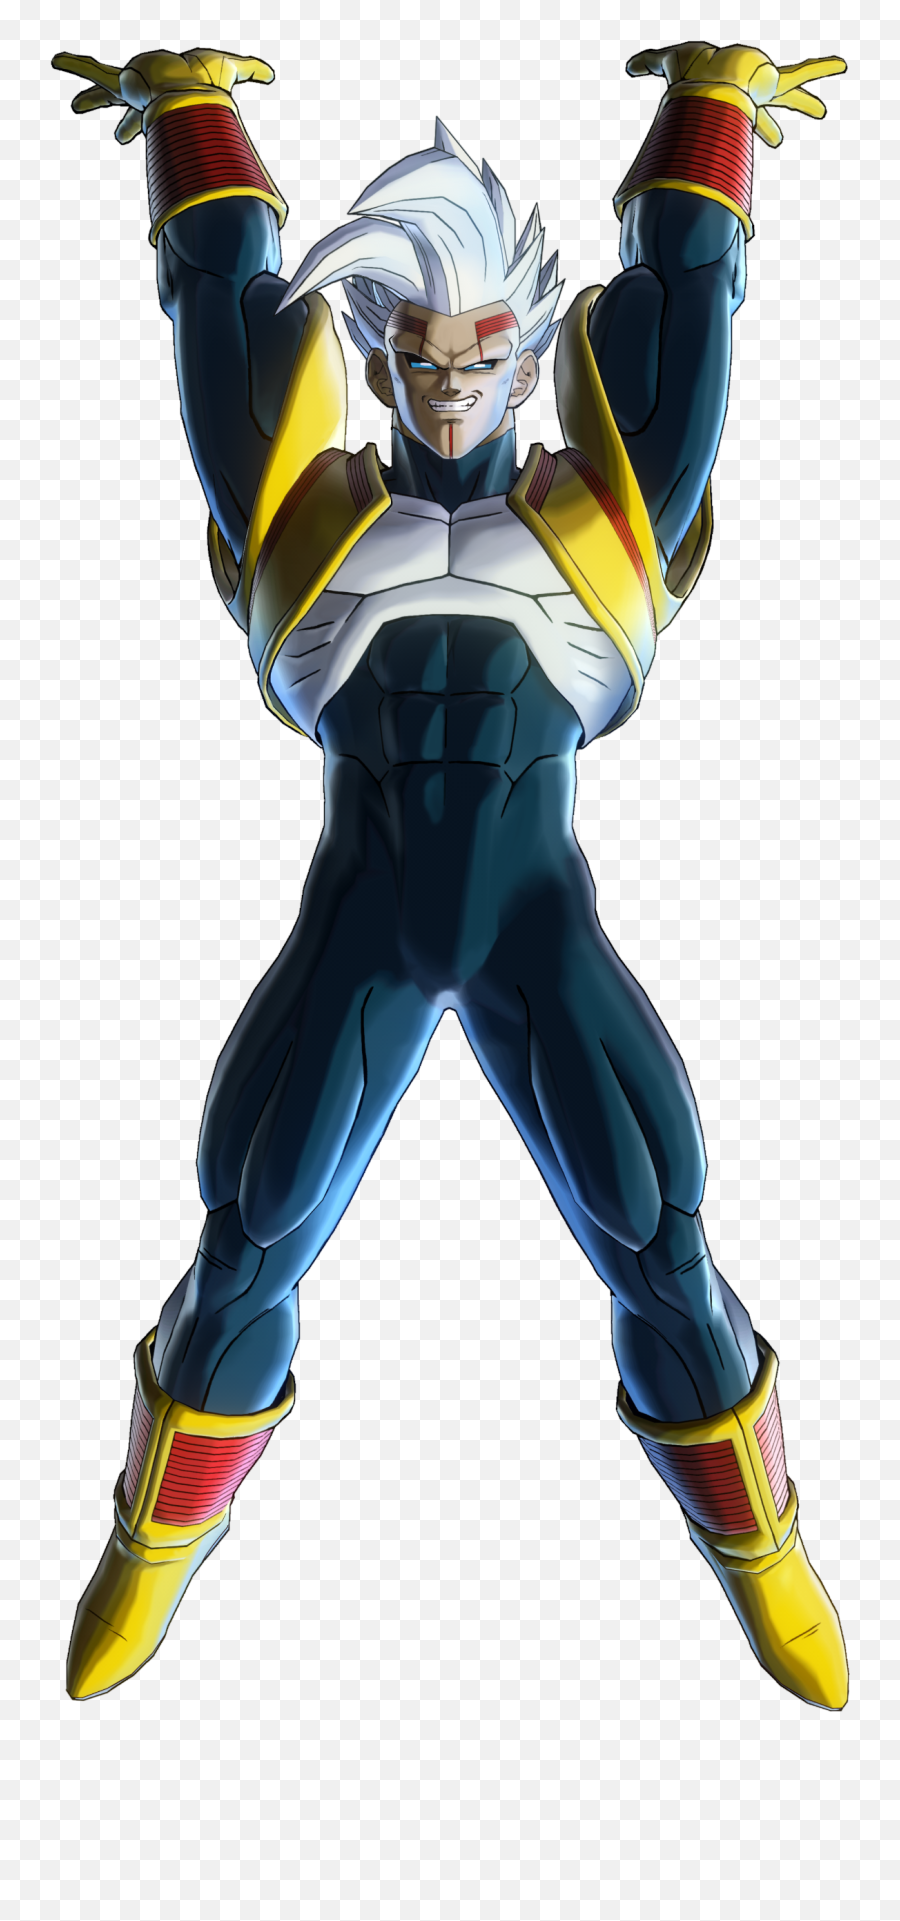 All Games Delta Dragon Ball Fighterz For Switch Launches Baby Vegeta Xenoverse 2 Png Free Transparent Png Images Pngaaa Com